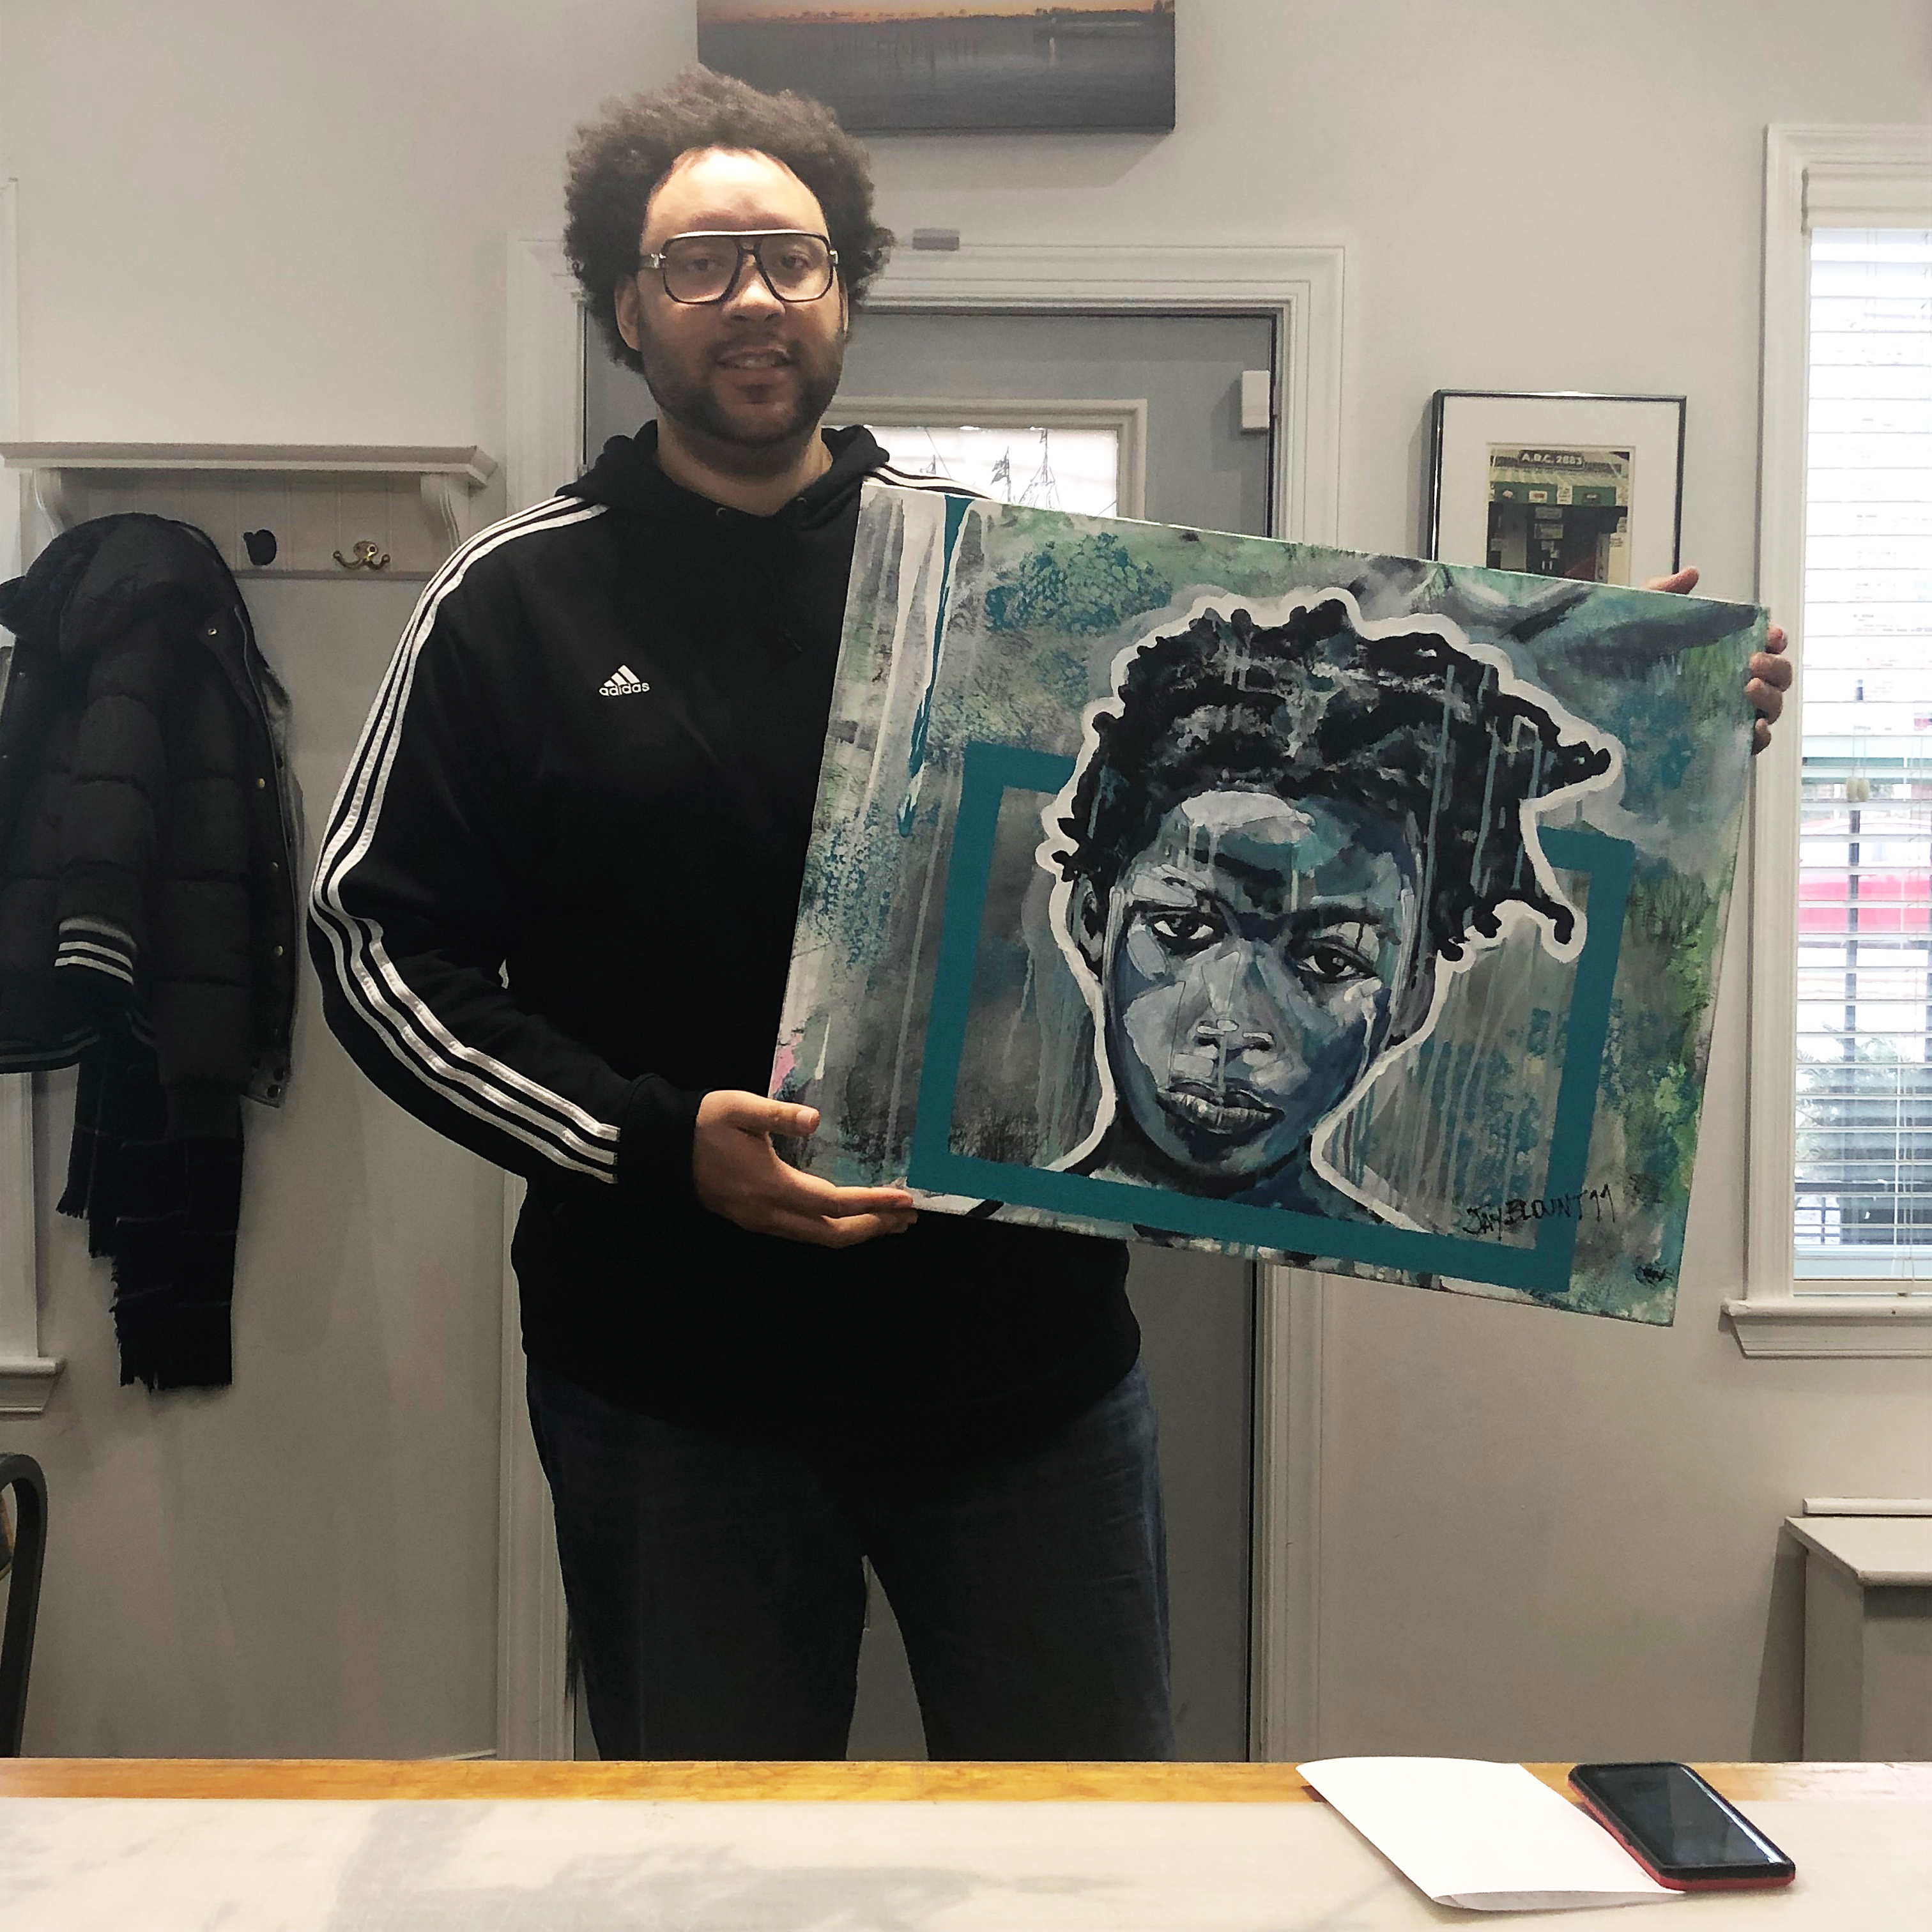 Artist Jay Blount poses with his painting of a portrait